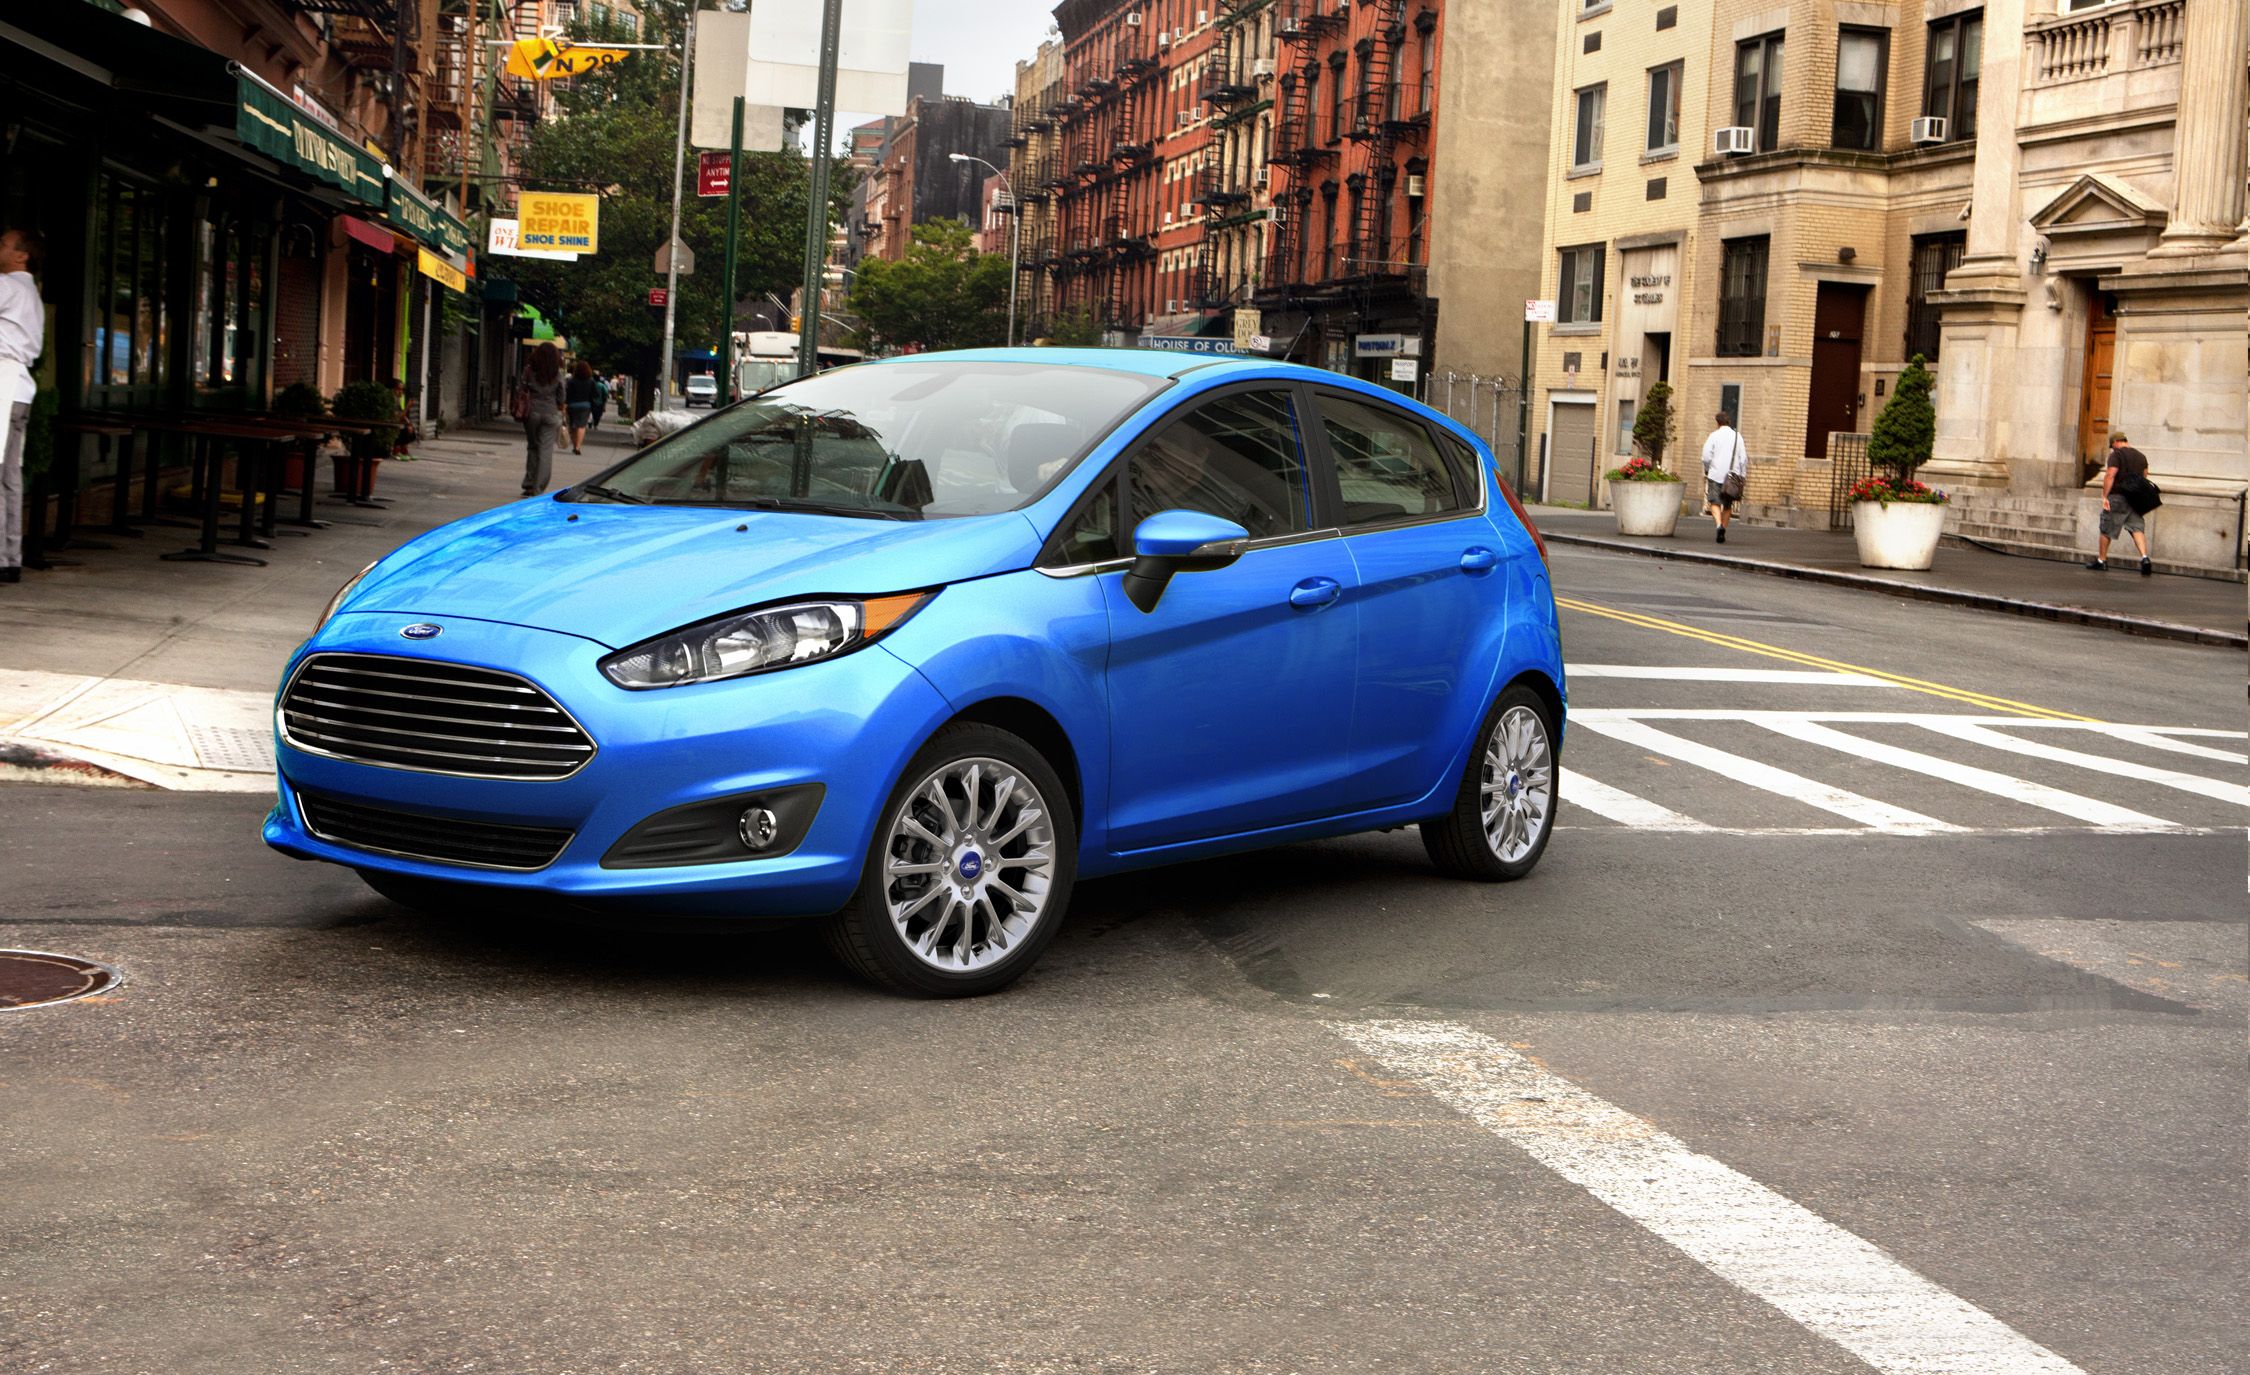 2017 Ford Fiesta Hatchback Automatic Test, Review